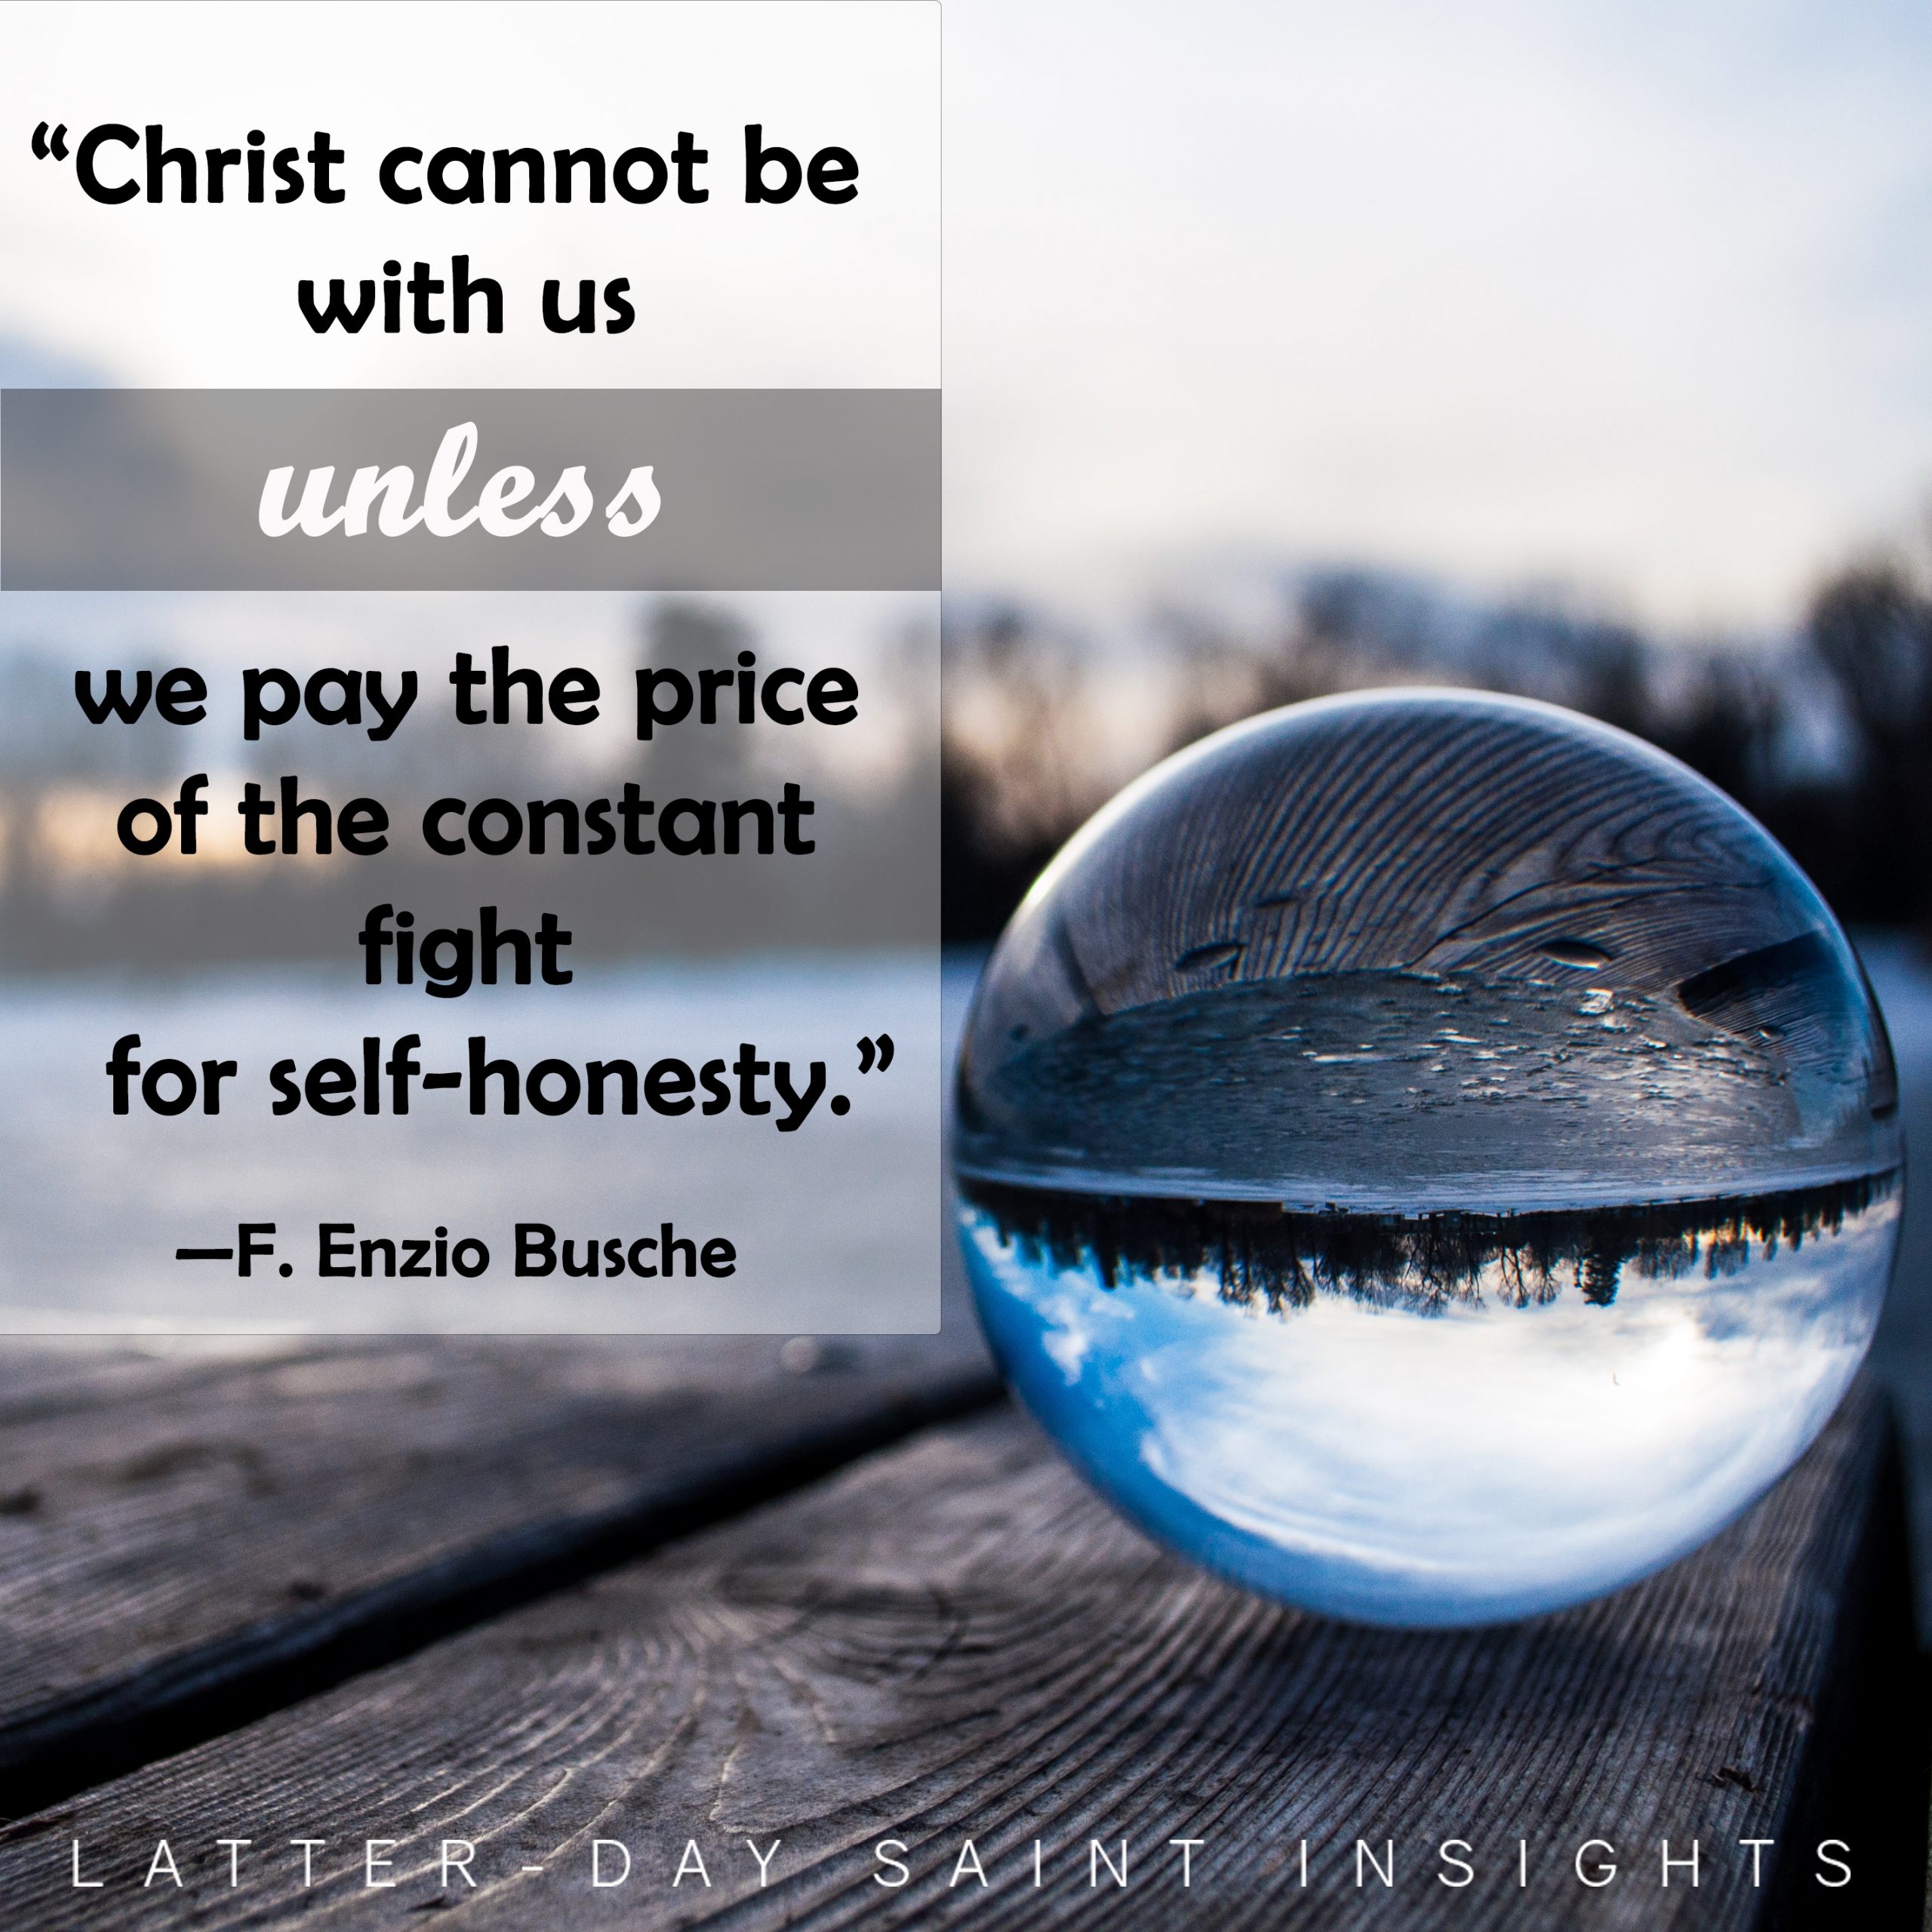 “Christ cannot be with us unless we pay the price of the constant fight for self-honesty.” --F. Enzio Busche